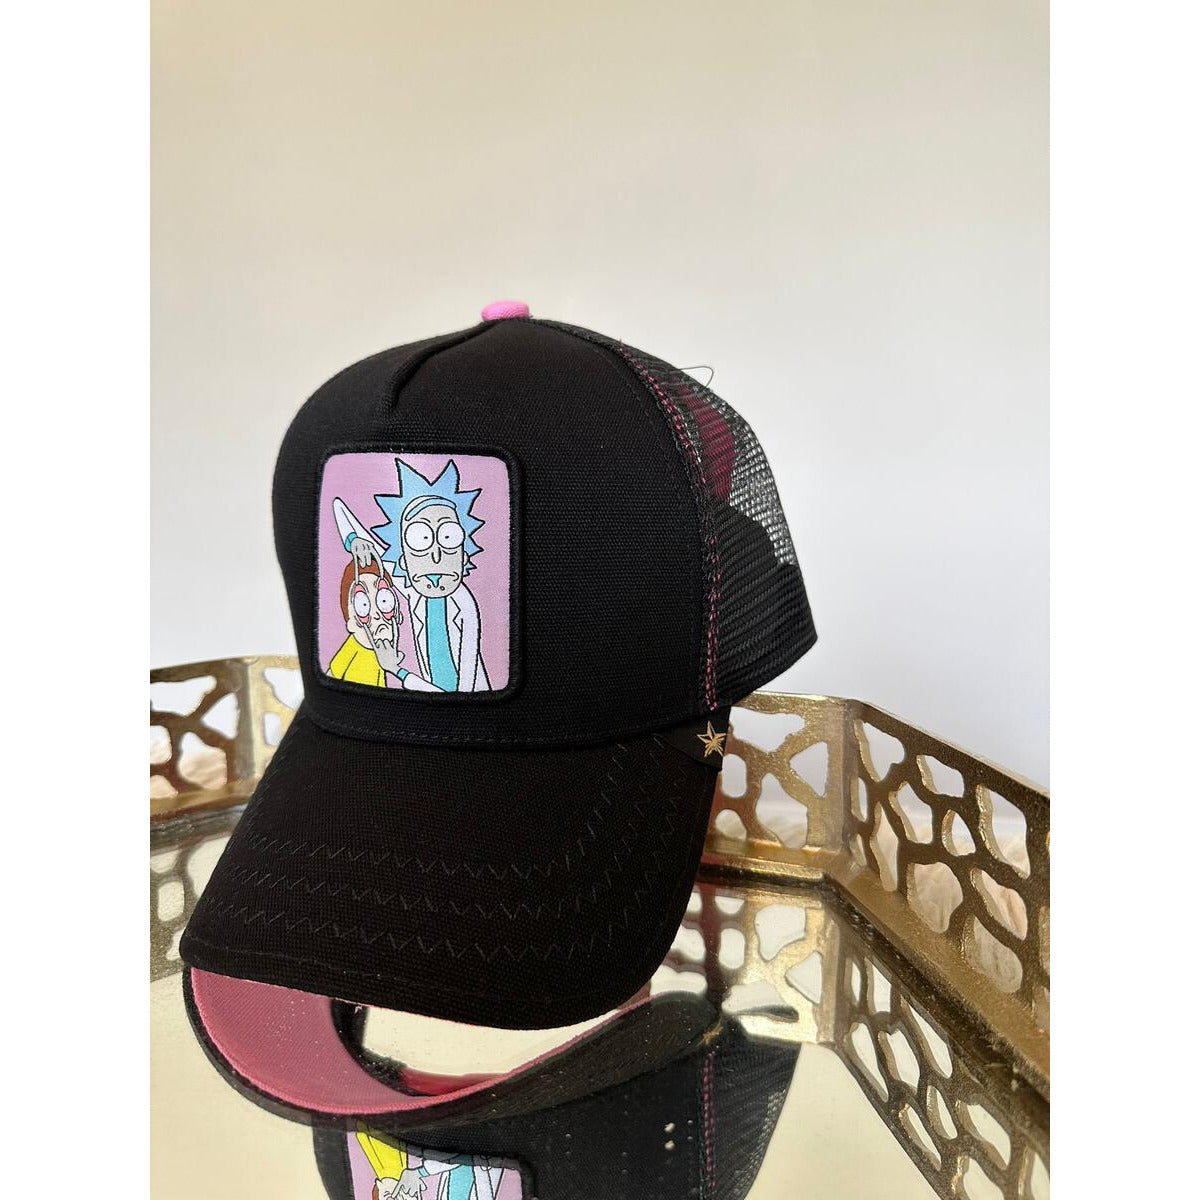 GOLD STAR - RICK AND MORTY TRUCKER HAT - BLACK/PINK